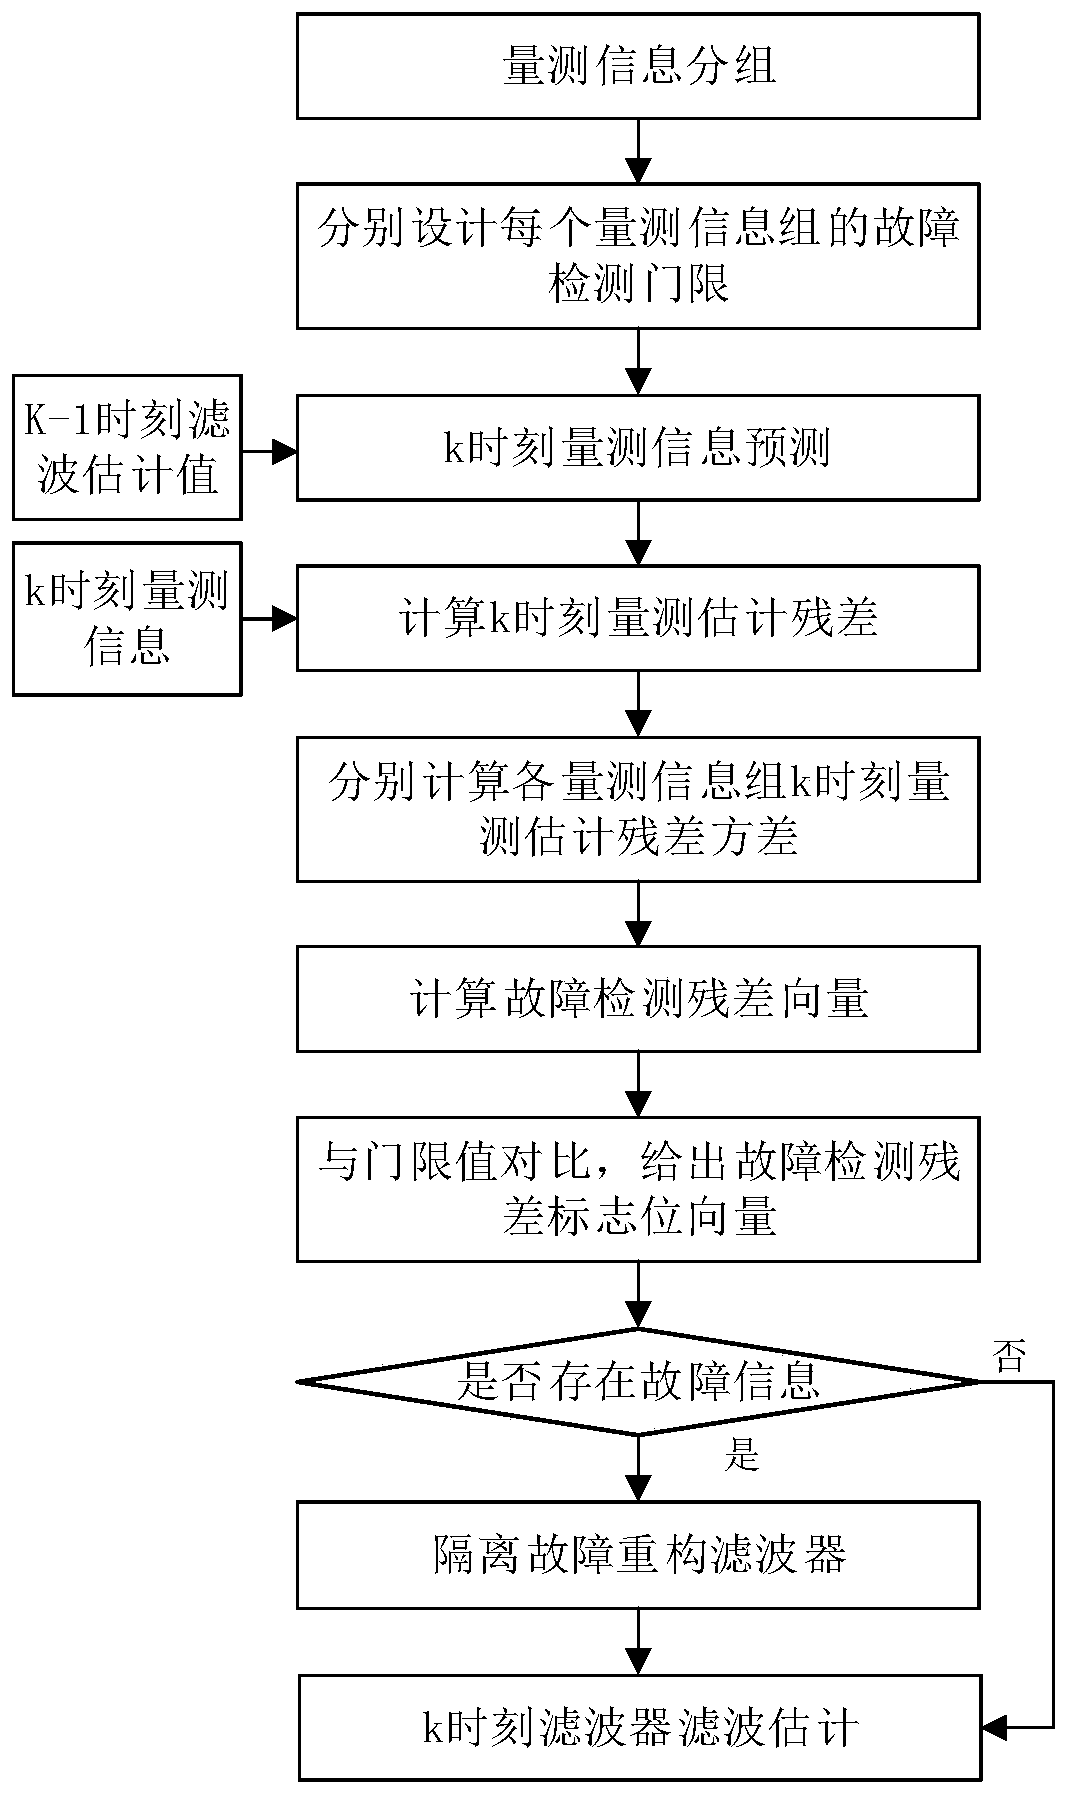 Polar zone centralized filter-based integrated navigation system residual vector fault detection and isolation method